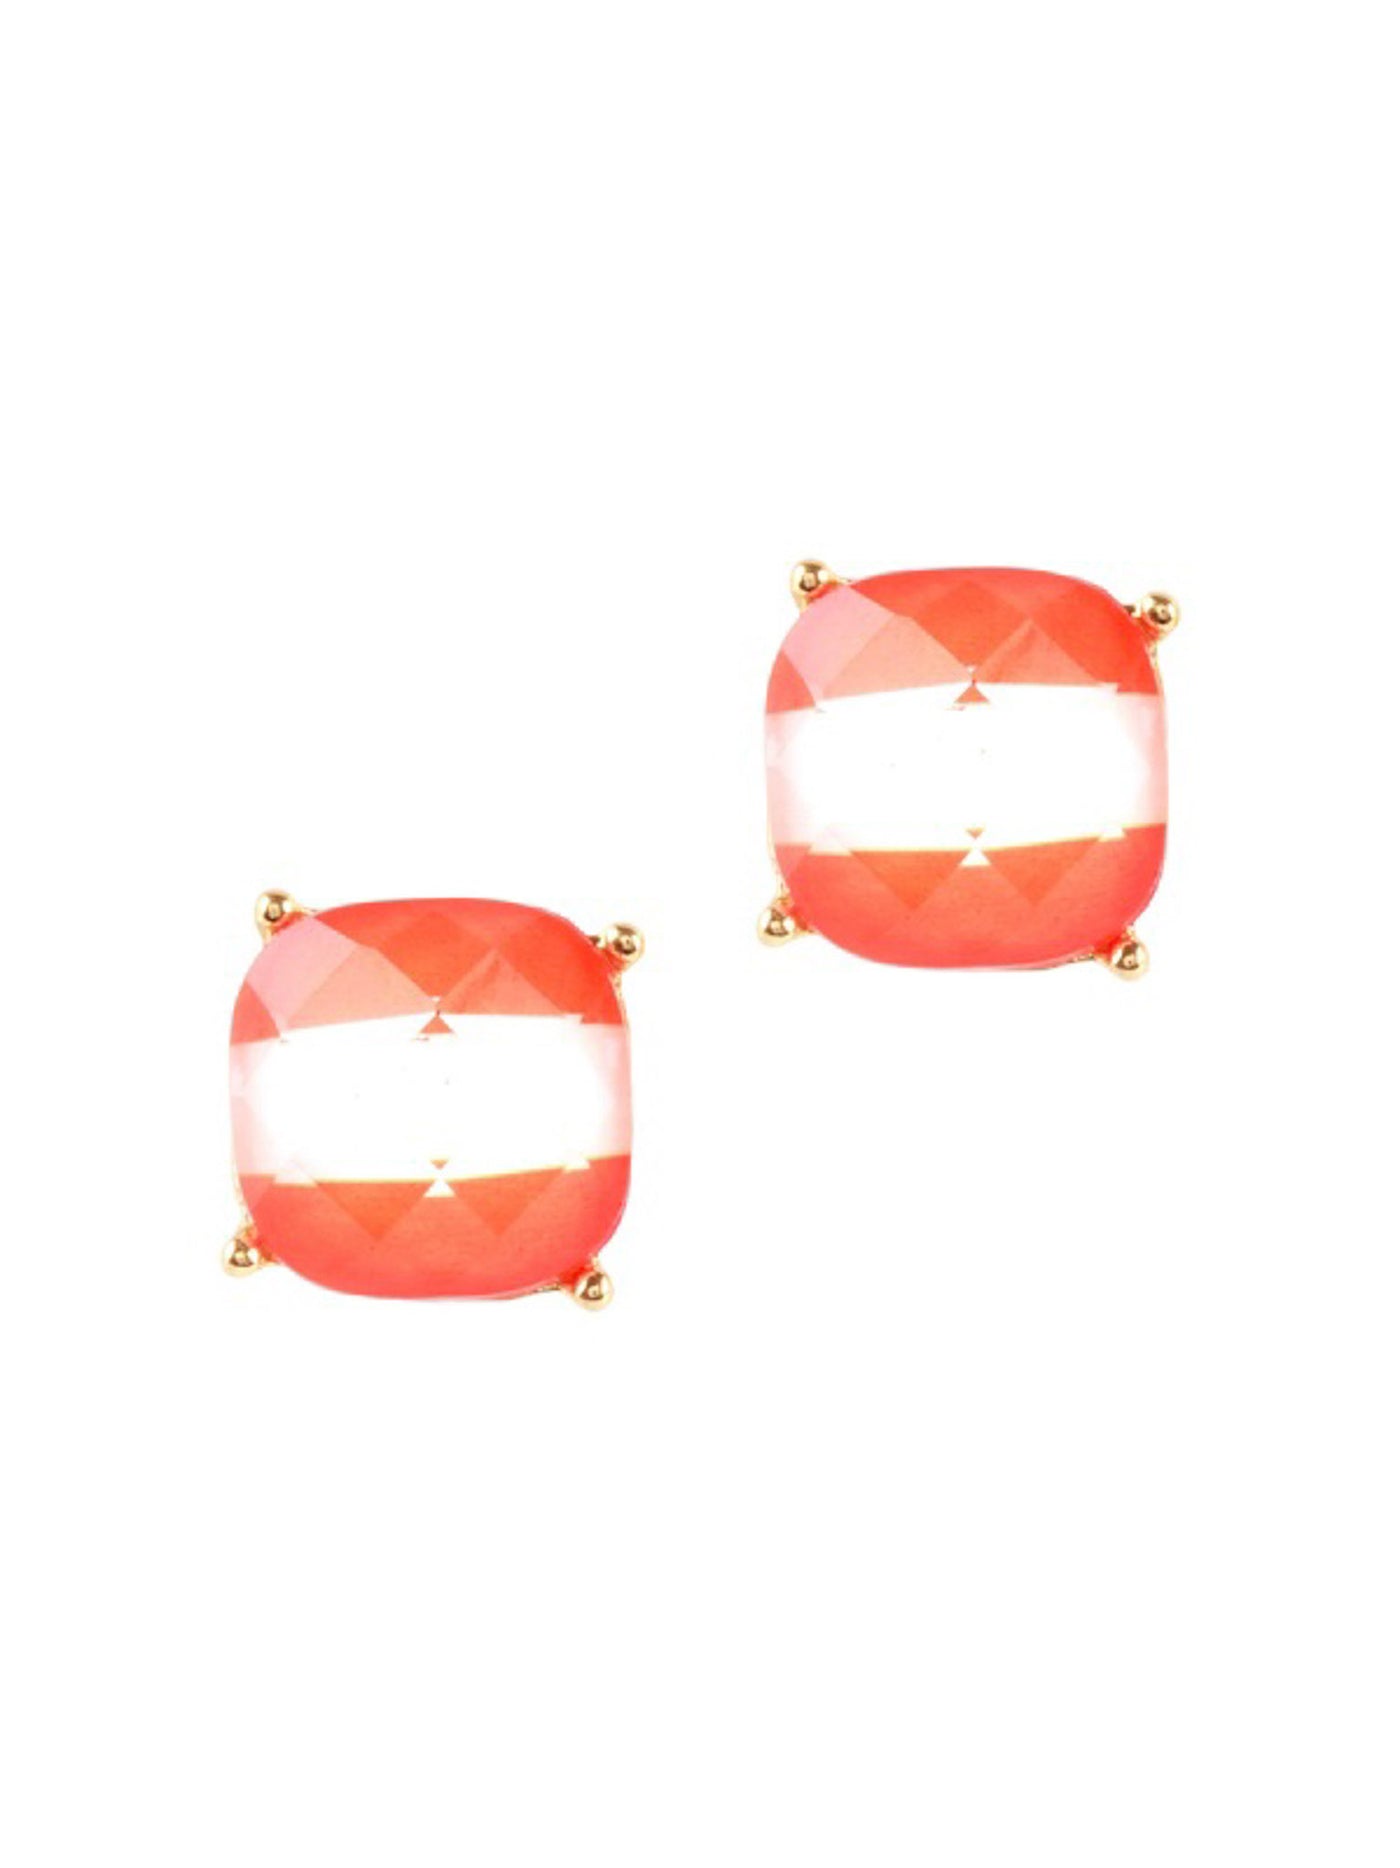 Orange and White Square Earrings